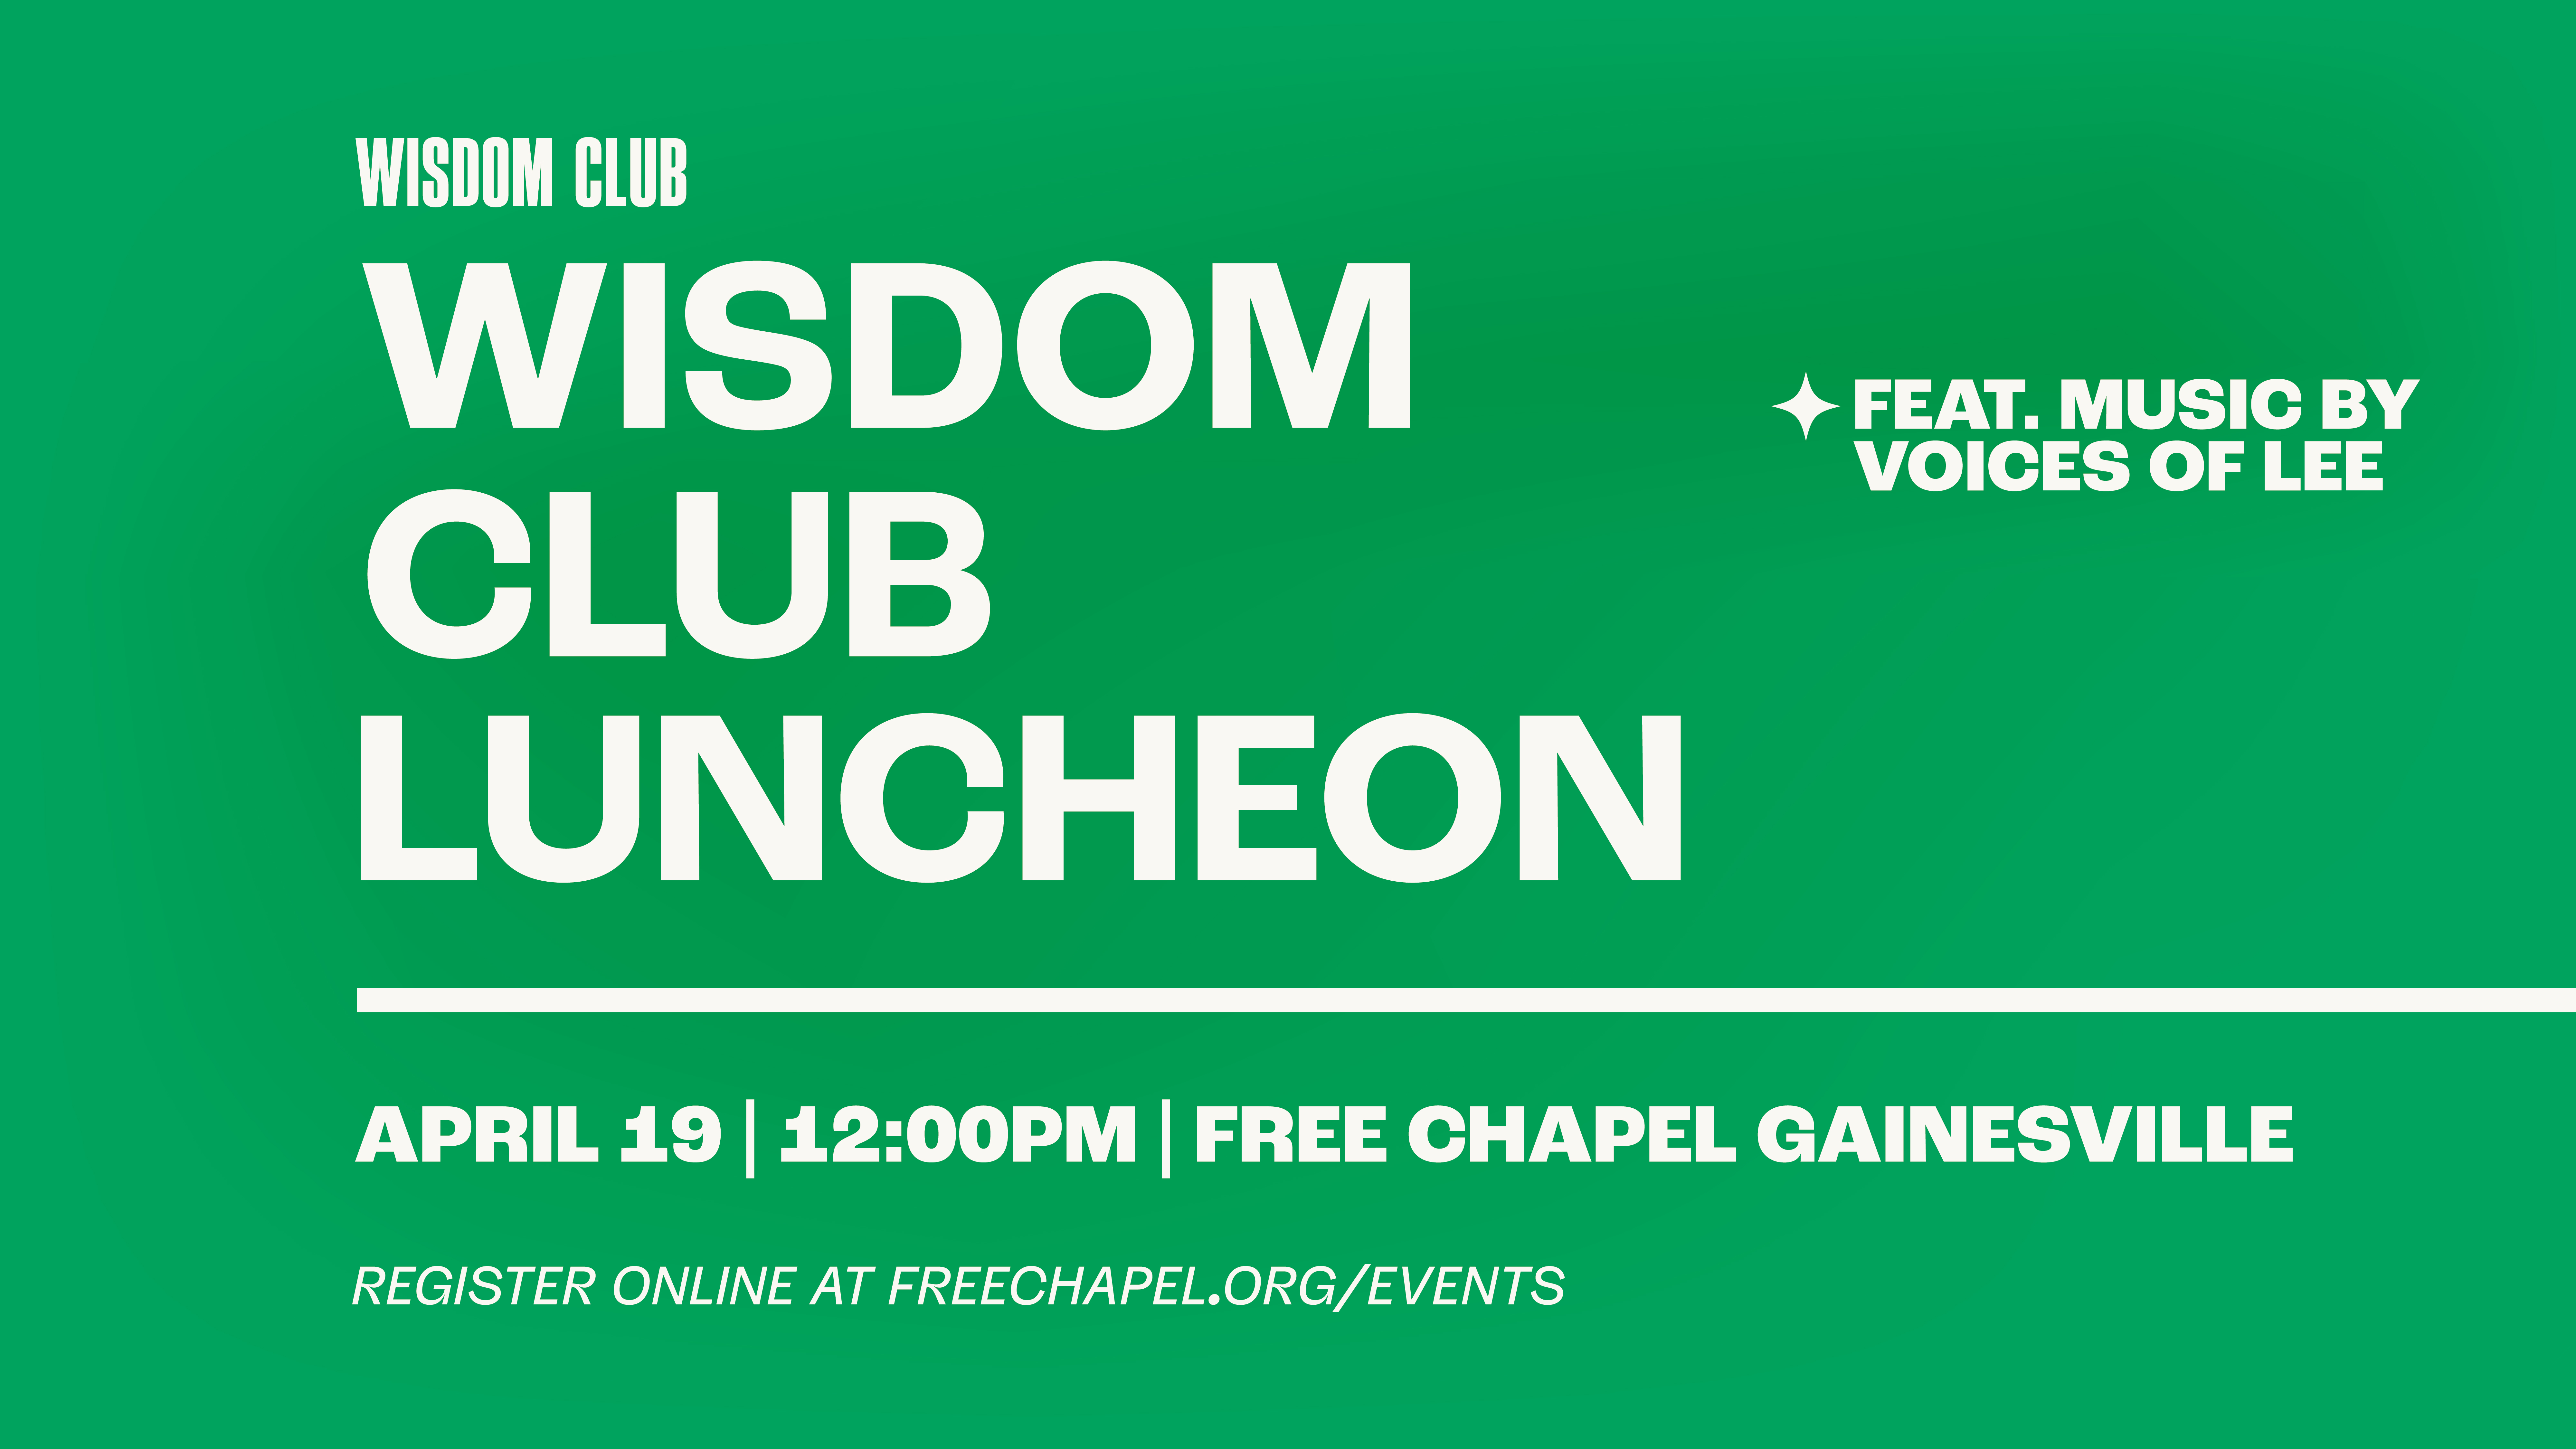 Wisdom Club Luncheon  at the Midtown campus